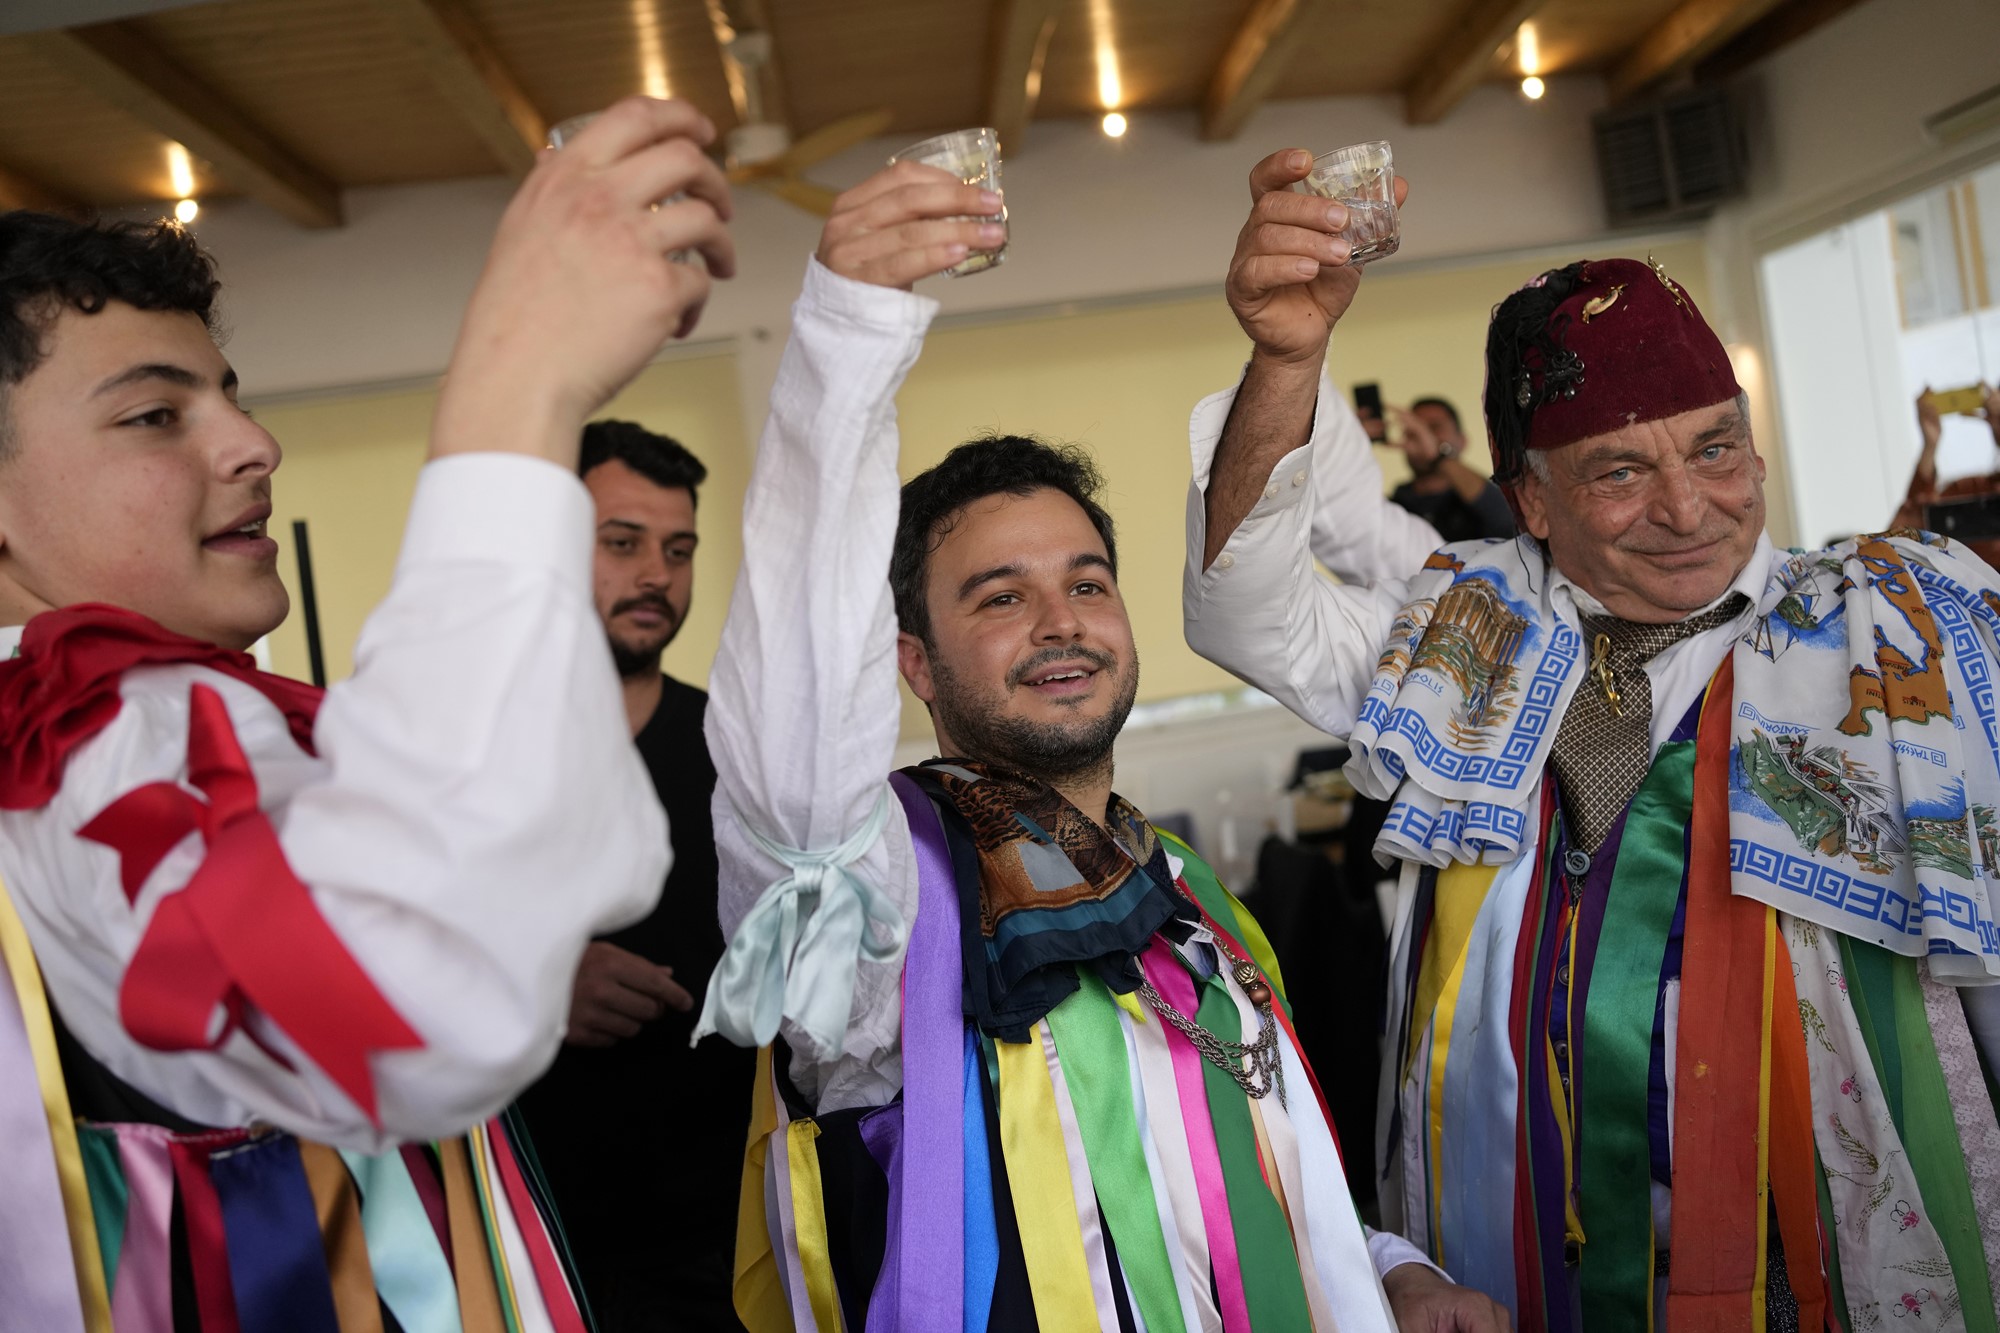 People in traditional ribboned Greek folk costumes cheer with small glasses.